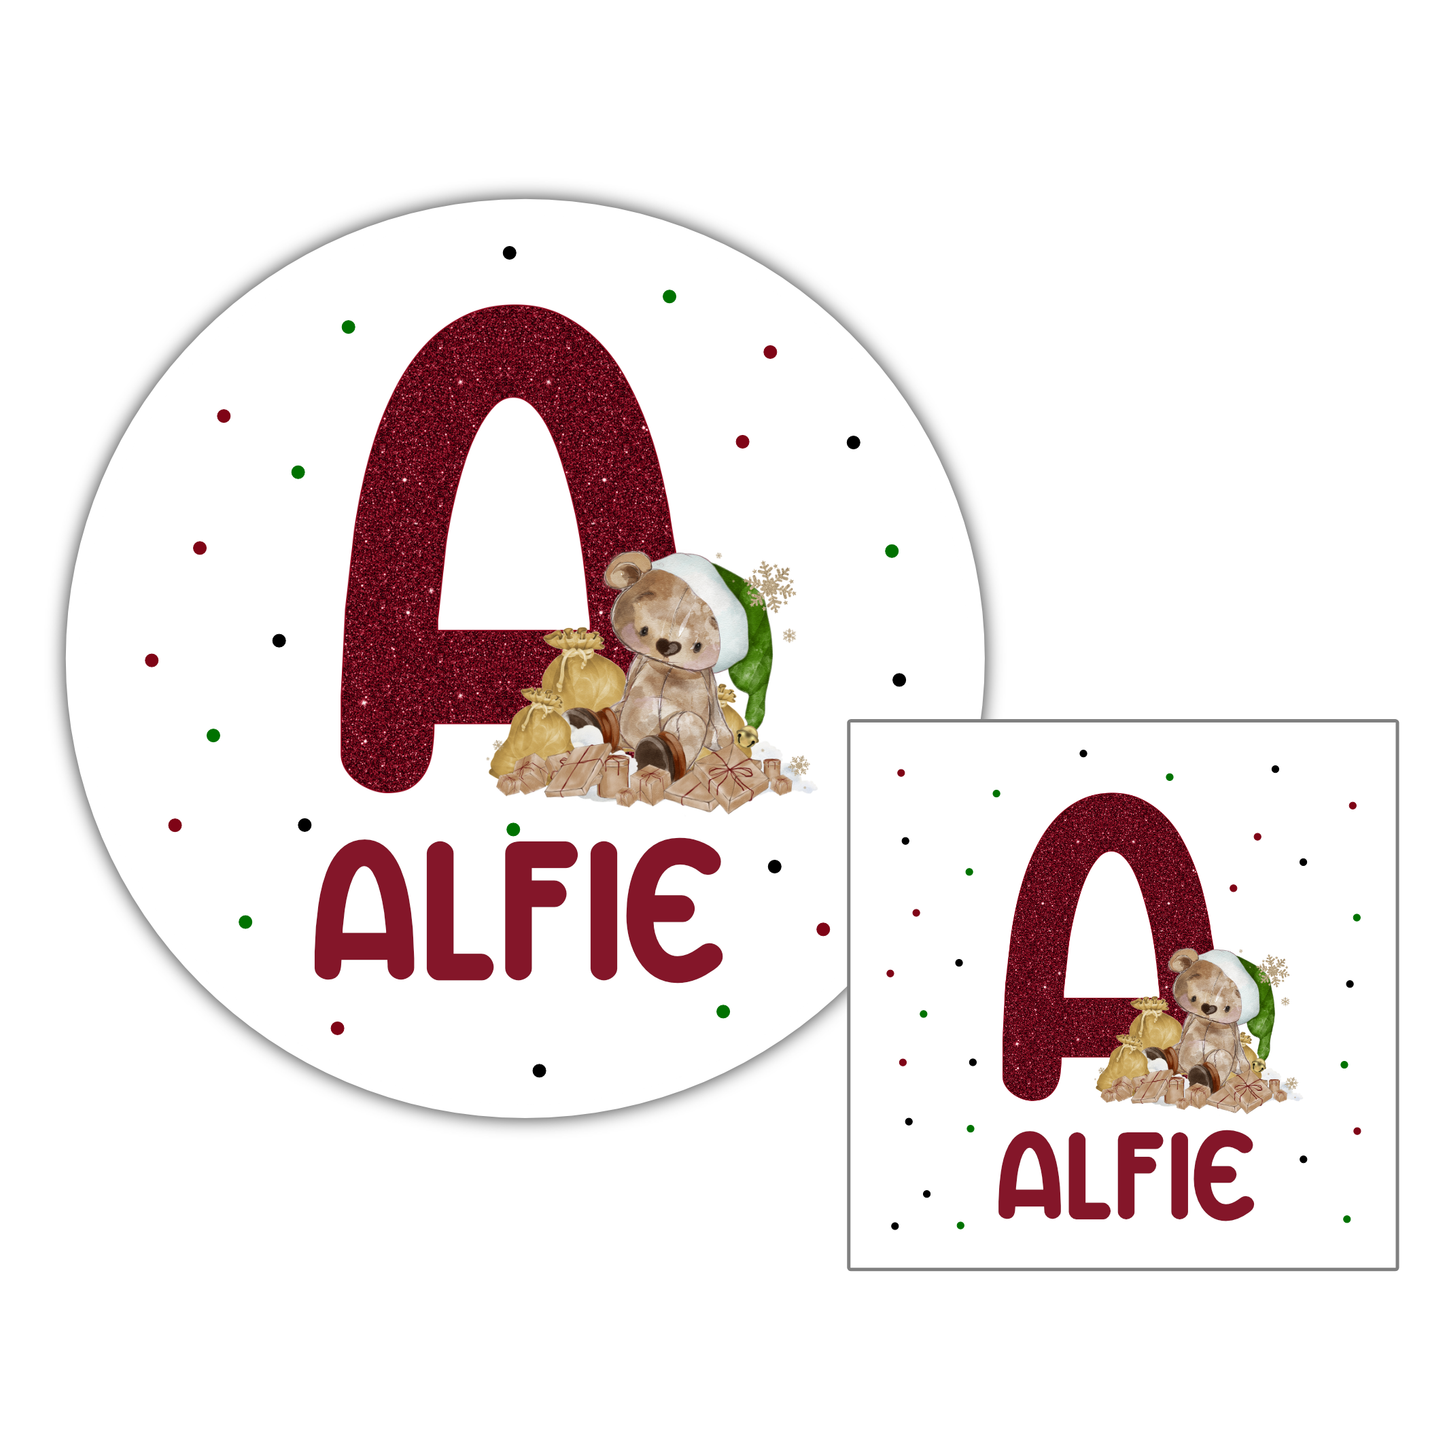 Personalised Christmas Stickers, Gift Labels, Festive Name Stickers, Custom Present Tag, Christmas Eve Box Ideas, Santa Stocking Filler